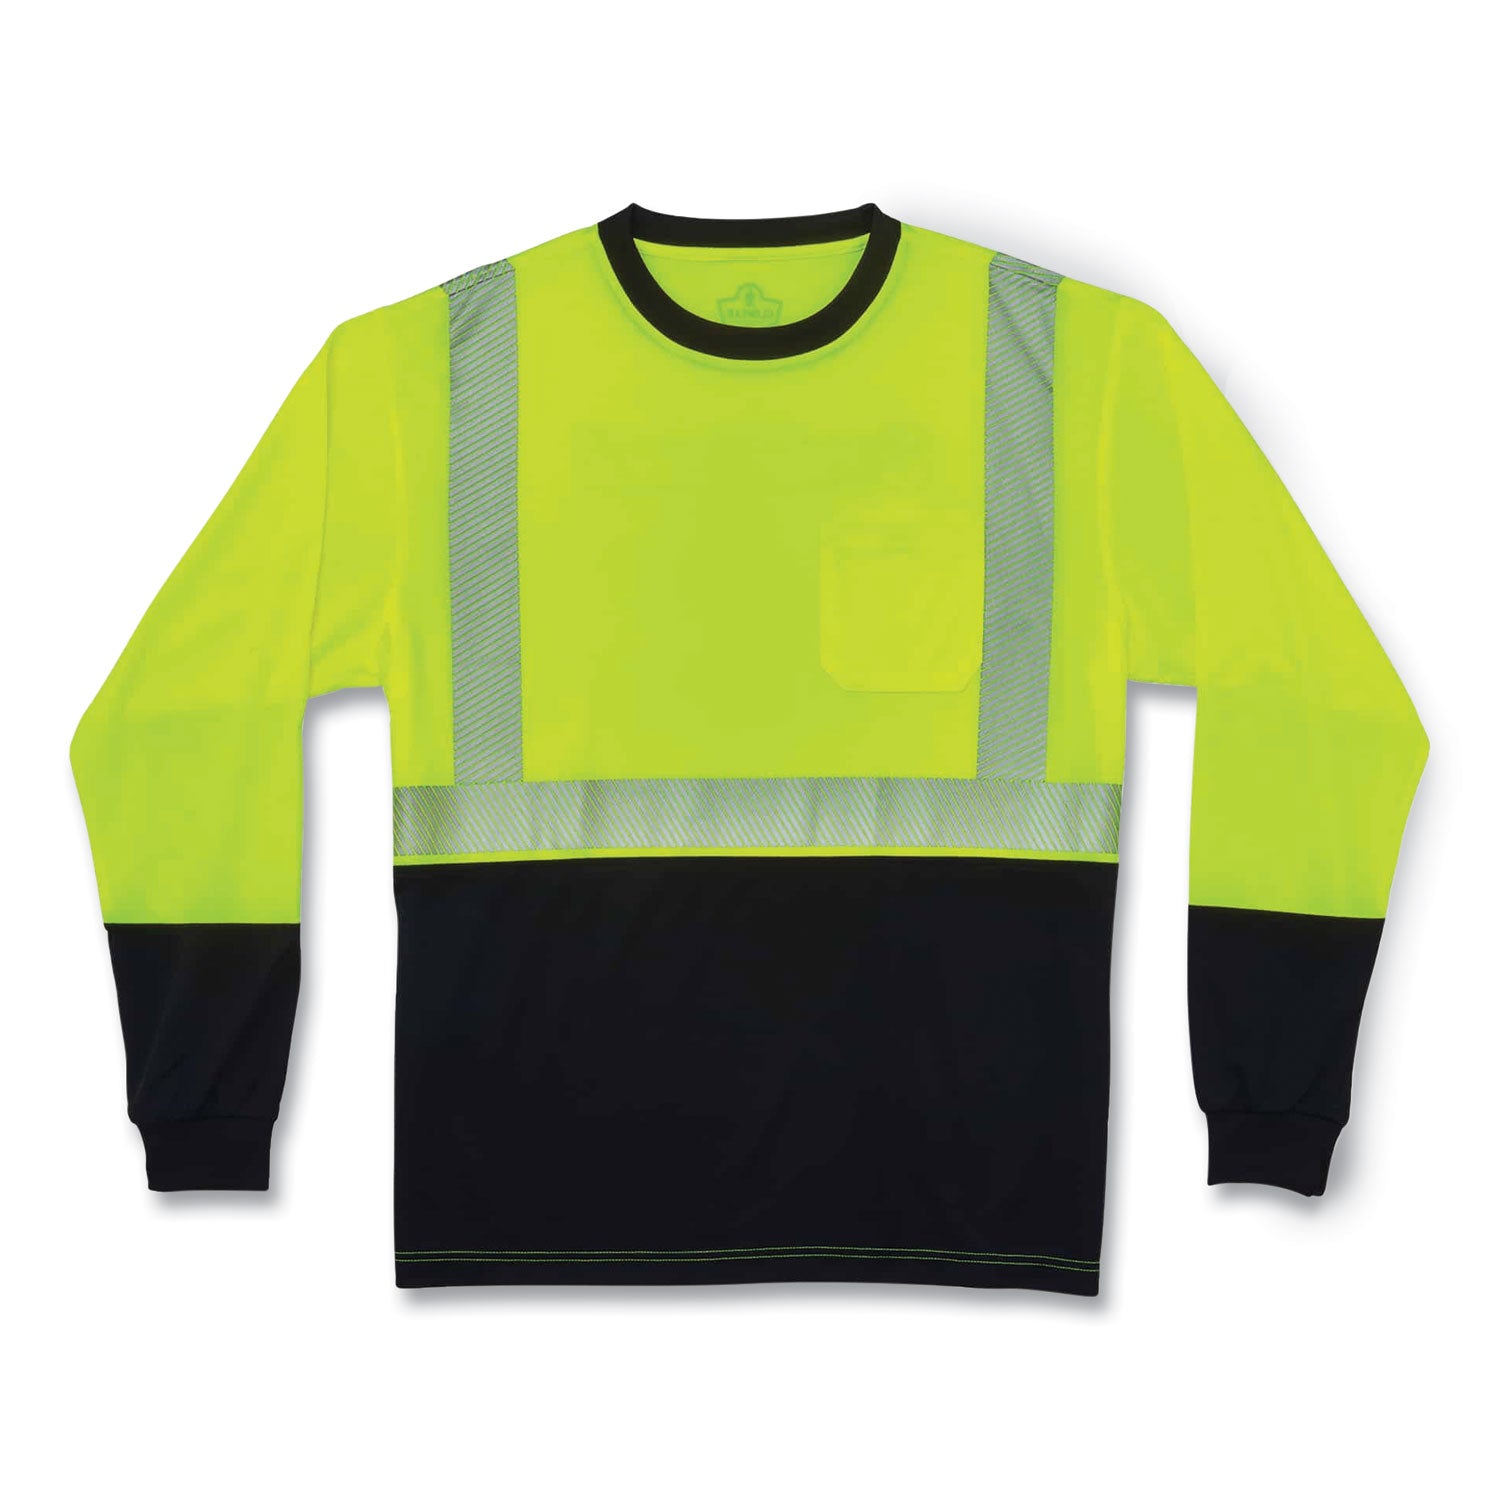 glowear-8281bk-class-2-long-sleeve-shirt-with-black-bottom-polyester-2x-large-lime-ships-in-1-3-business-days_ego22636 - 1